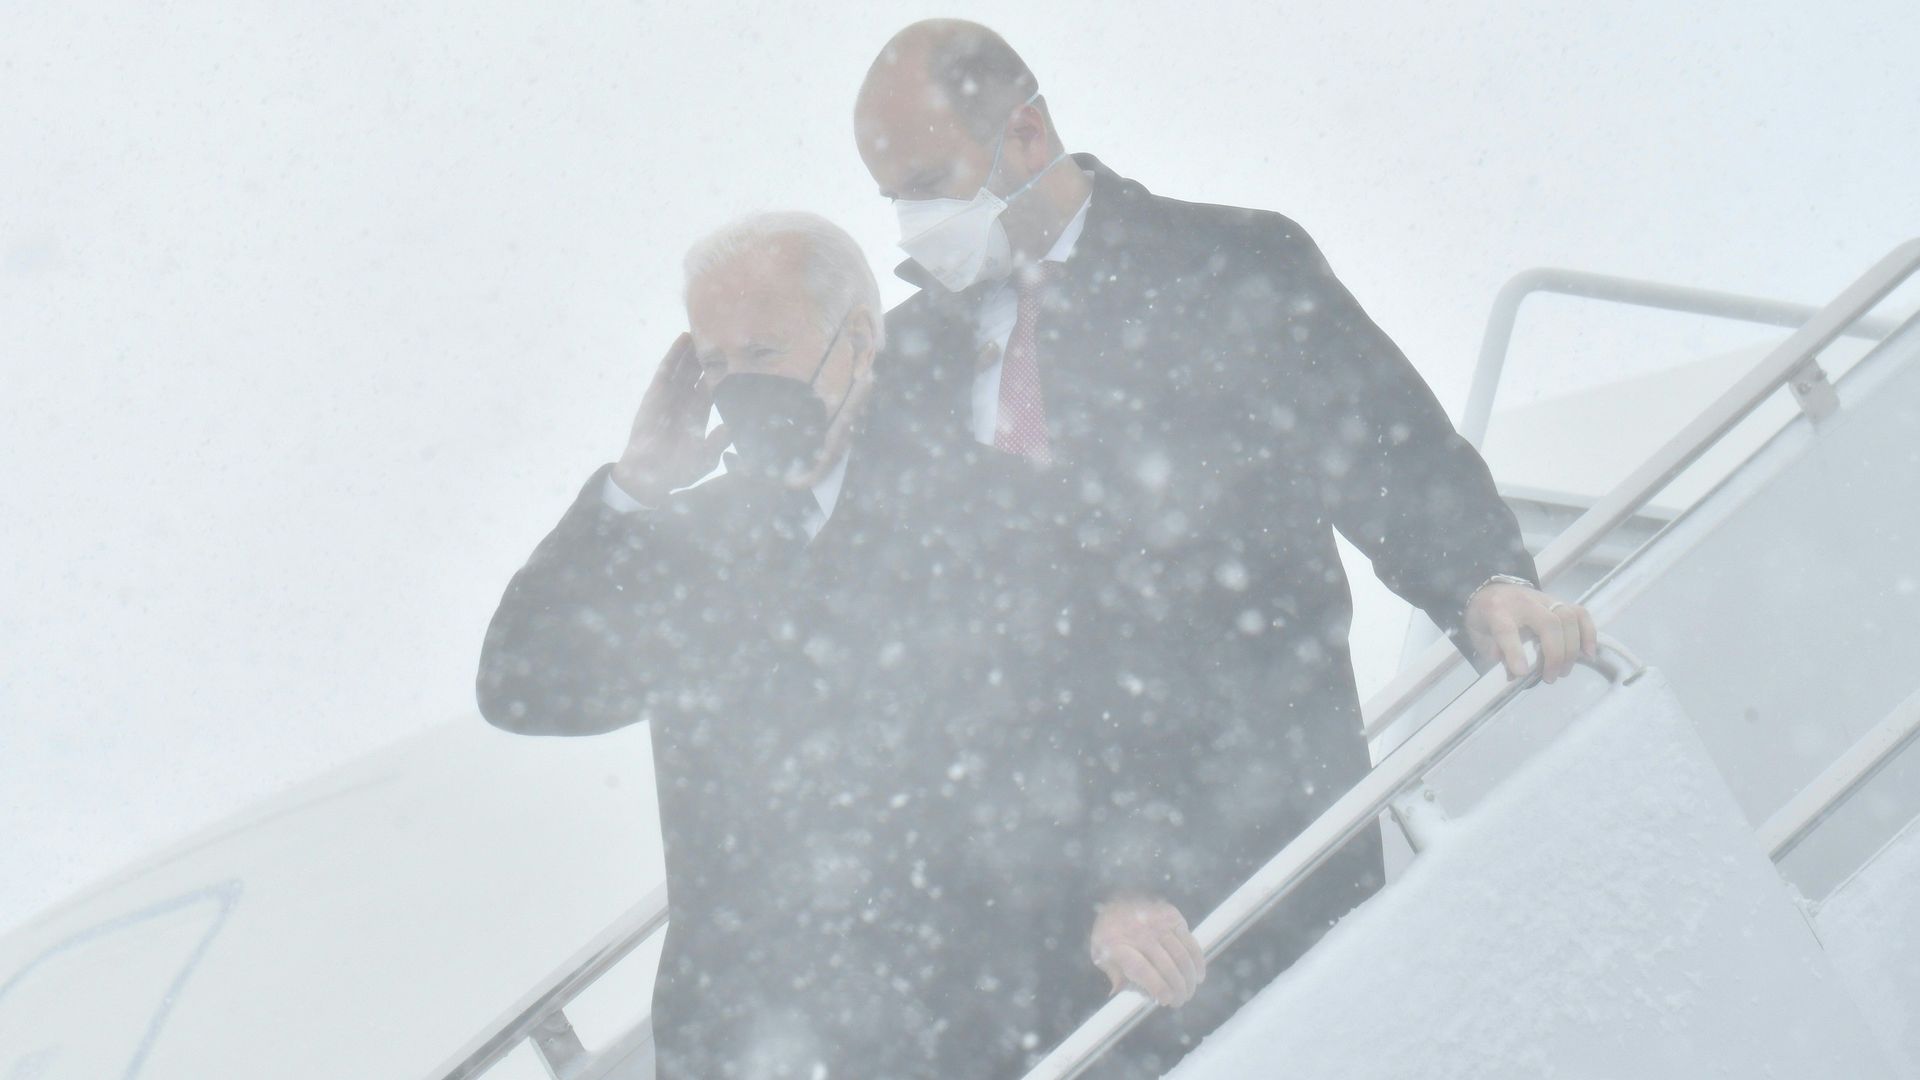 A Secret Service agent is seen shadowing President Biden as he descends snow-covered steps from Air Force One.